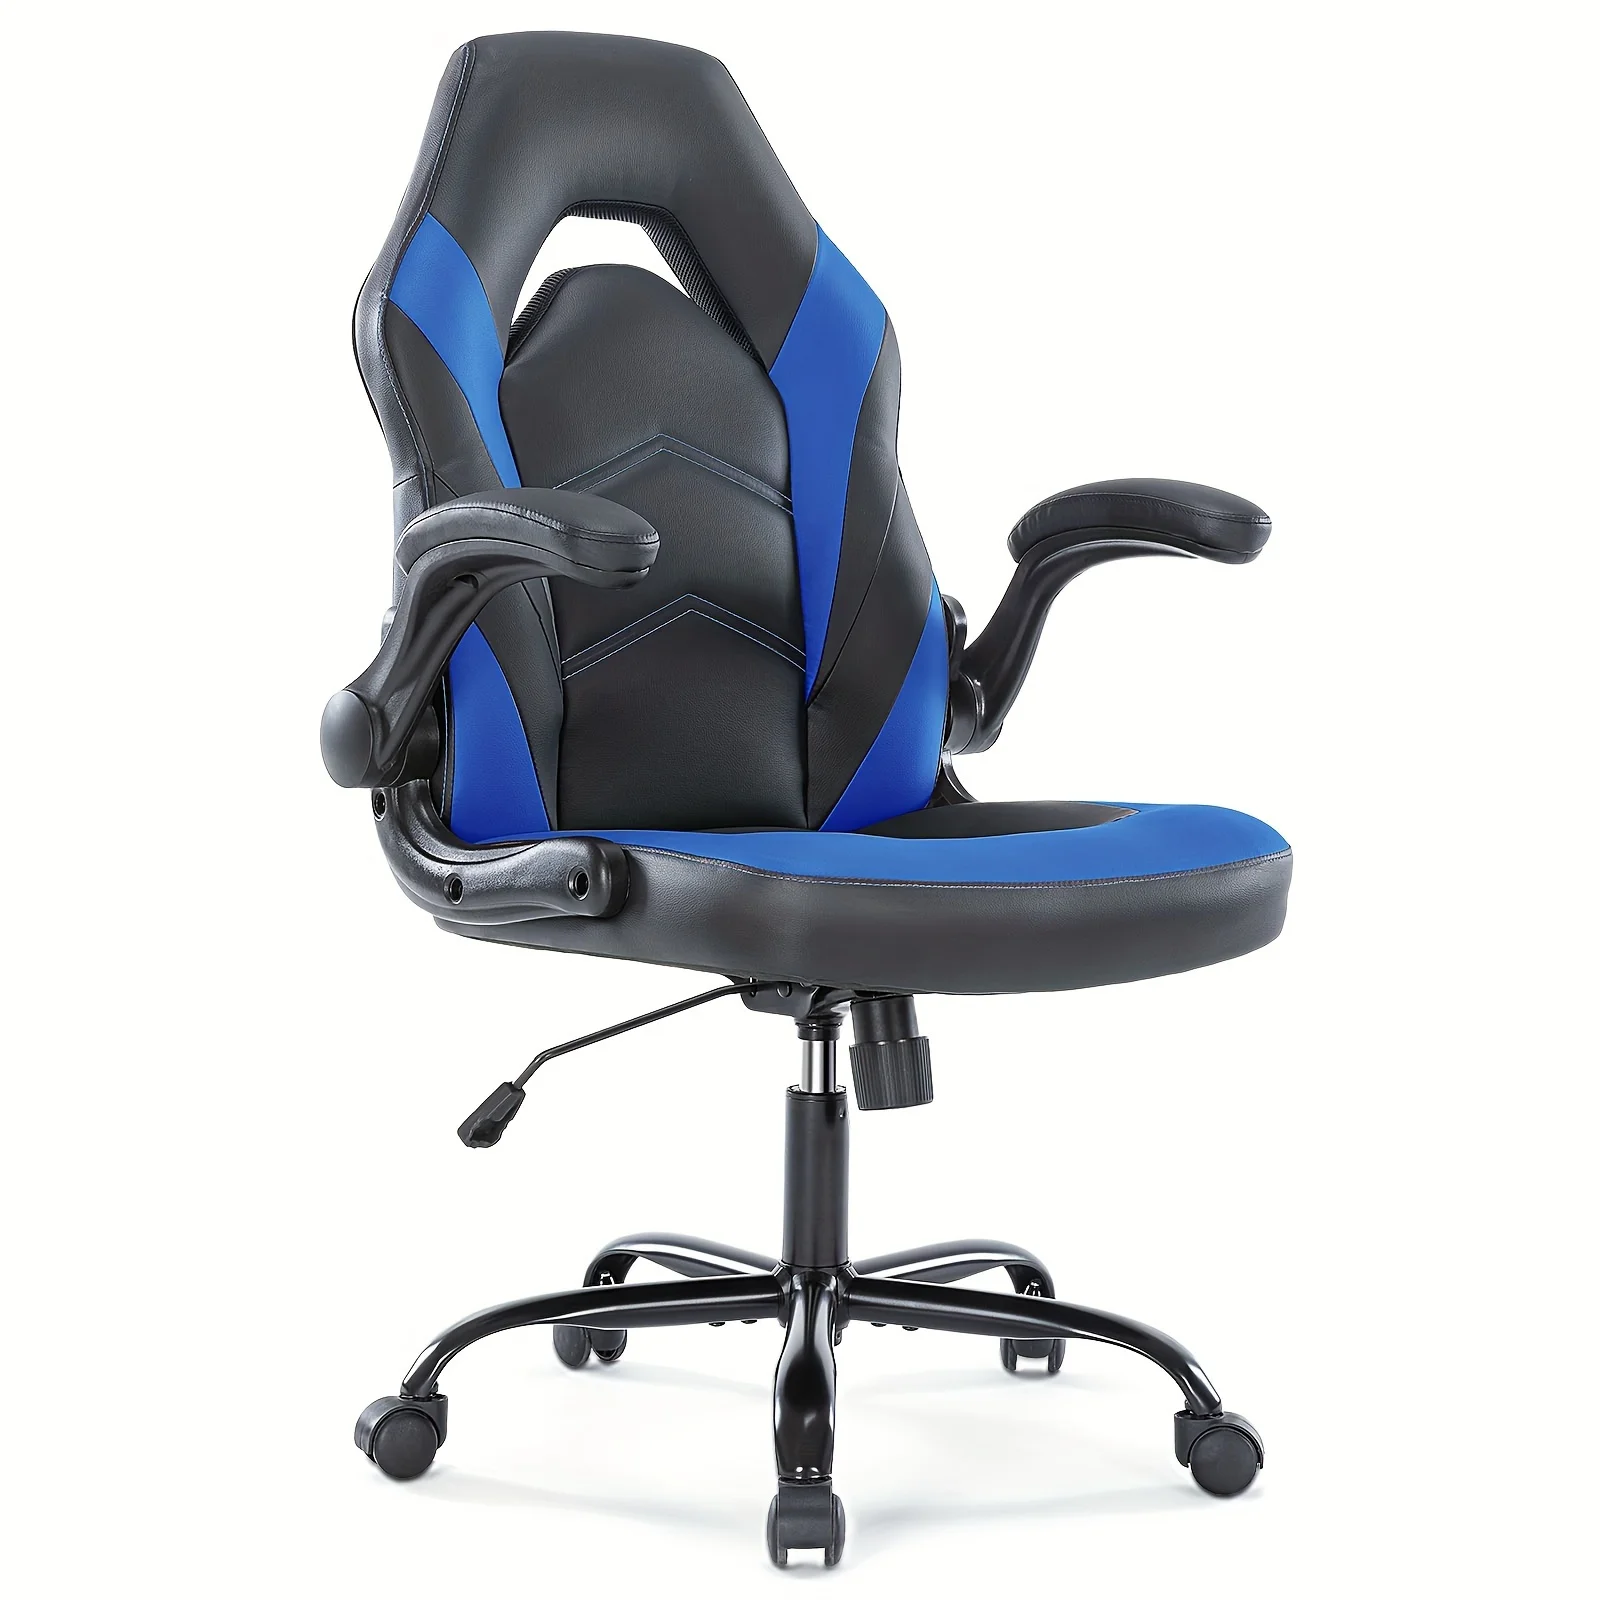 

1pc Ergonomic PU Desk Chair for Adults - Flip Arms, Comfortable Task Seating for Gaming & Office Work, Suitable for Men and Wome